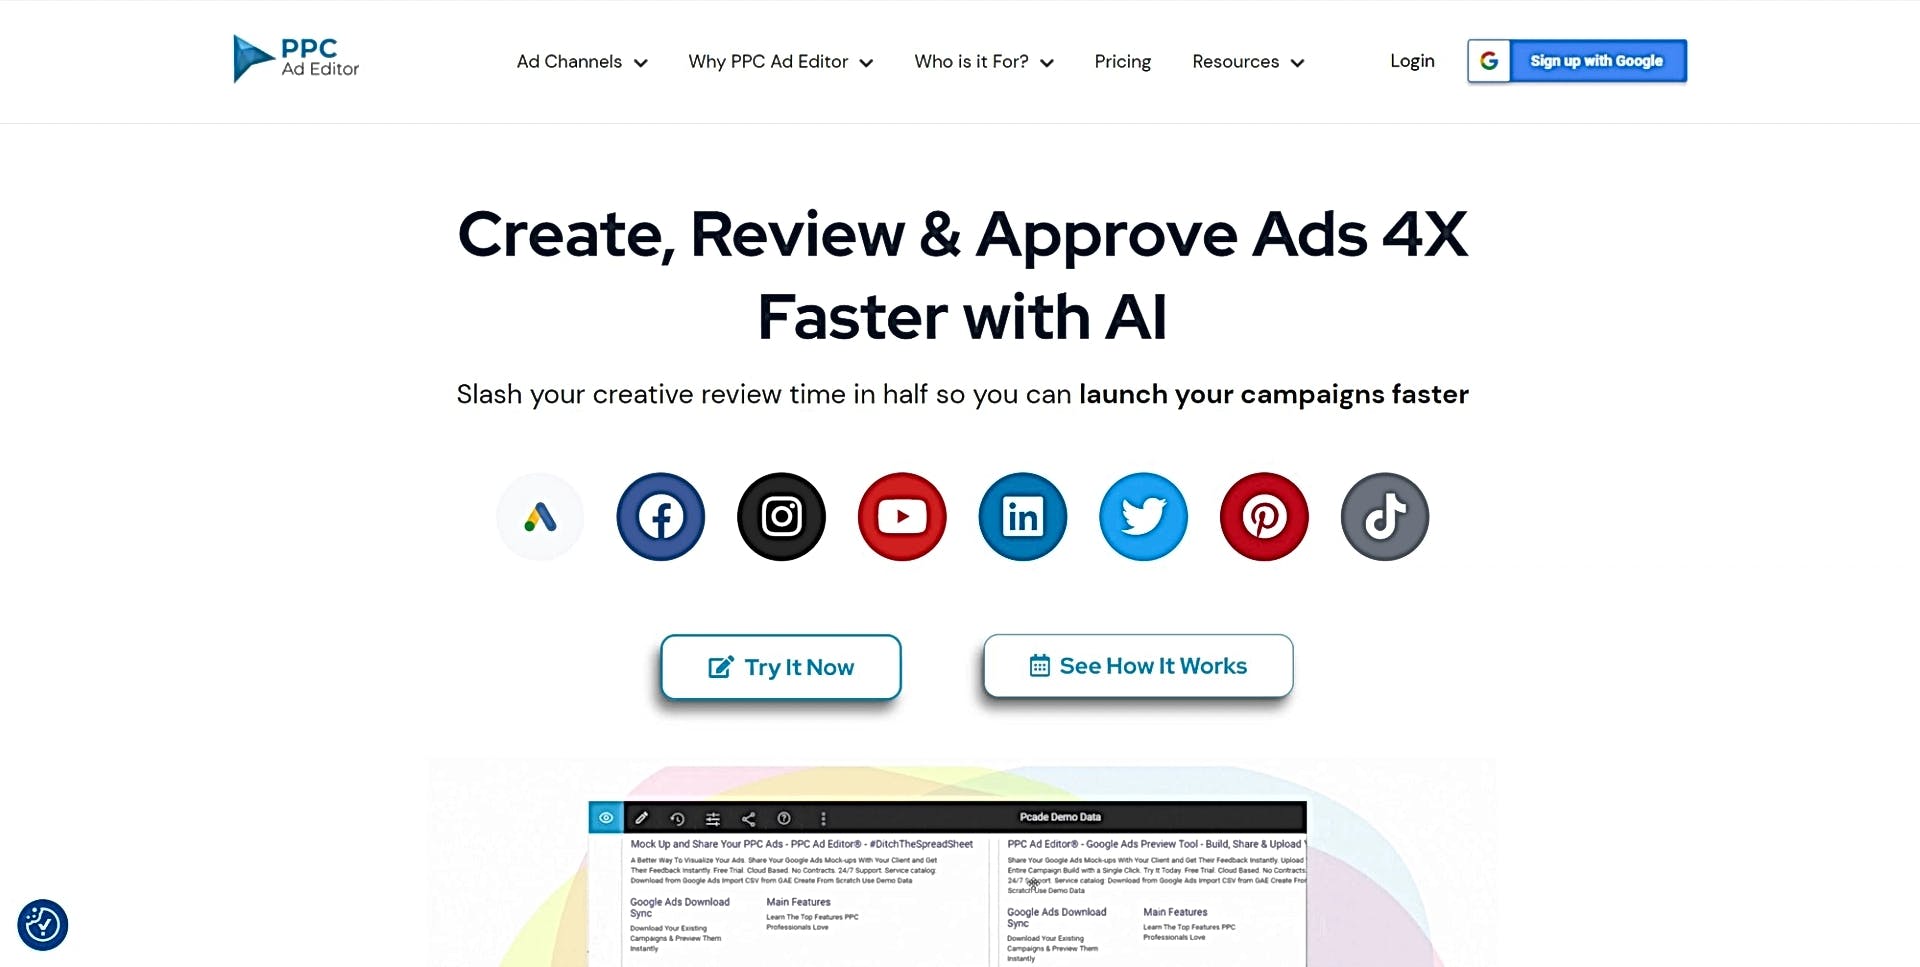 PPC Ad Editor featured